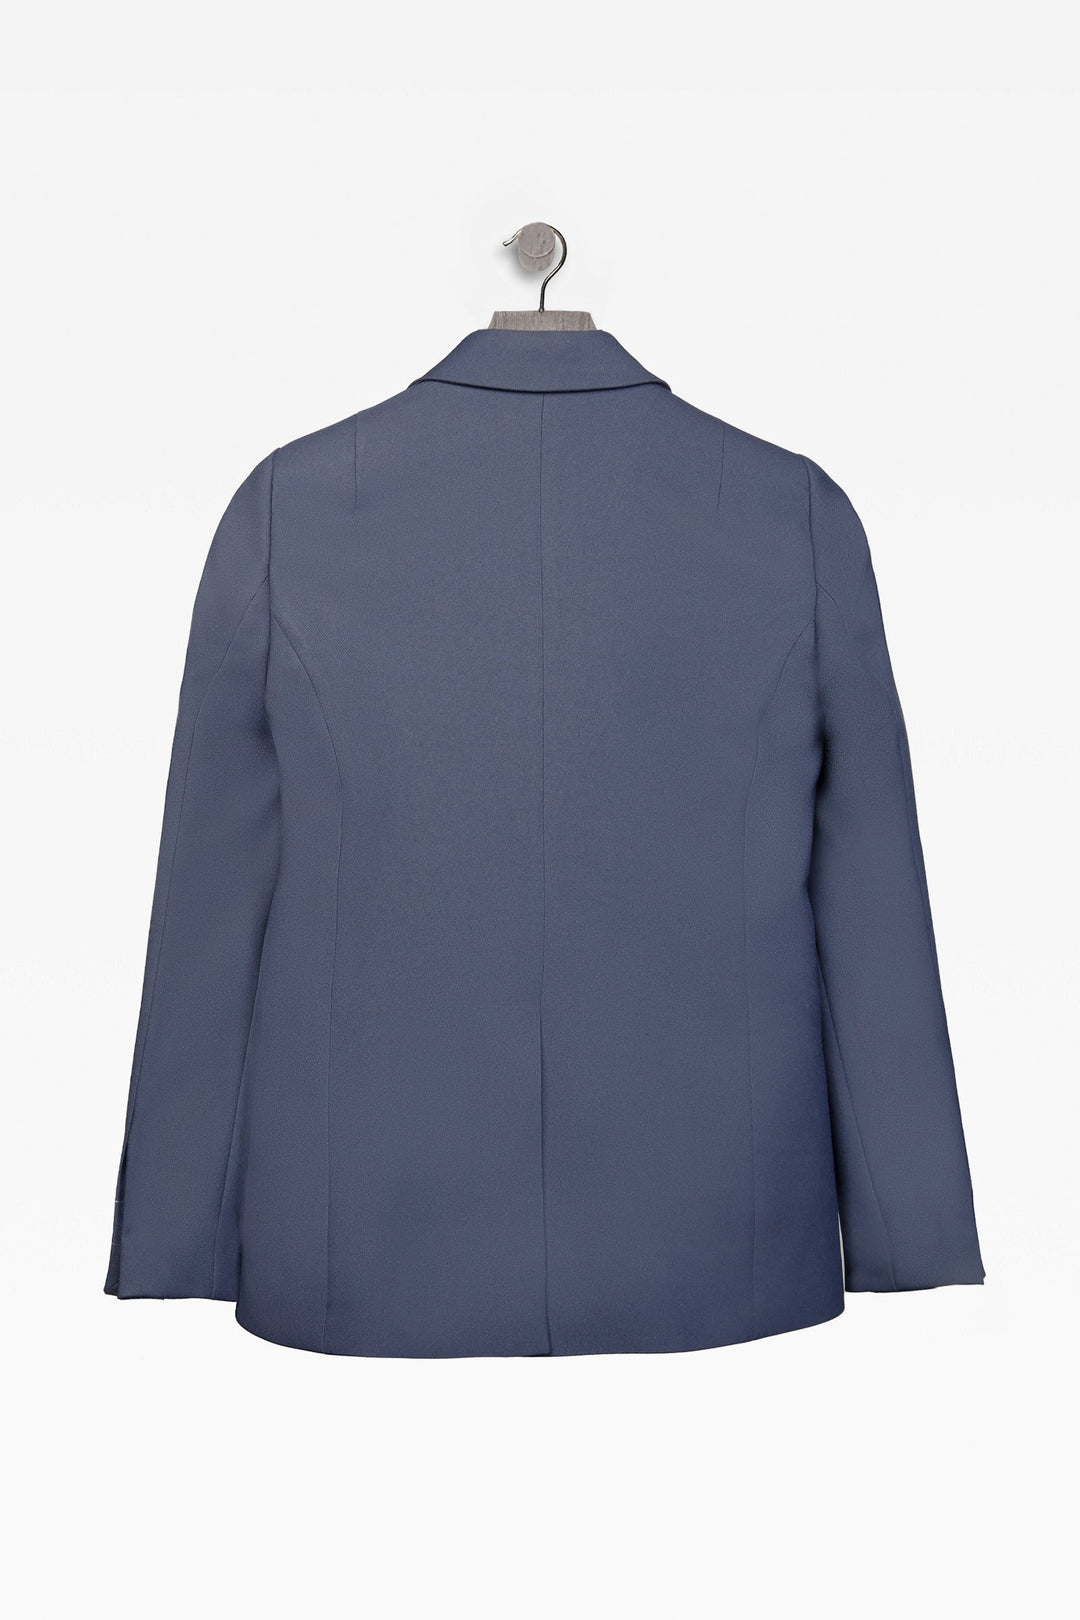 Sam French Navy Single Breasted Jacket: Tailored Elegance Essential for Modern Women